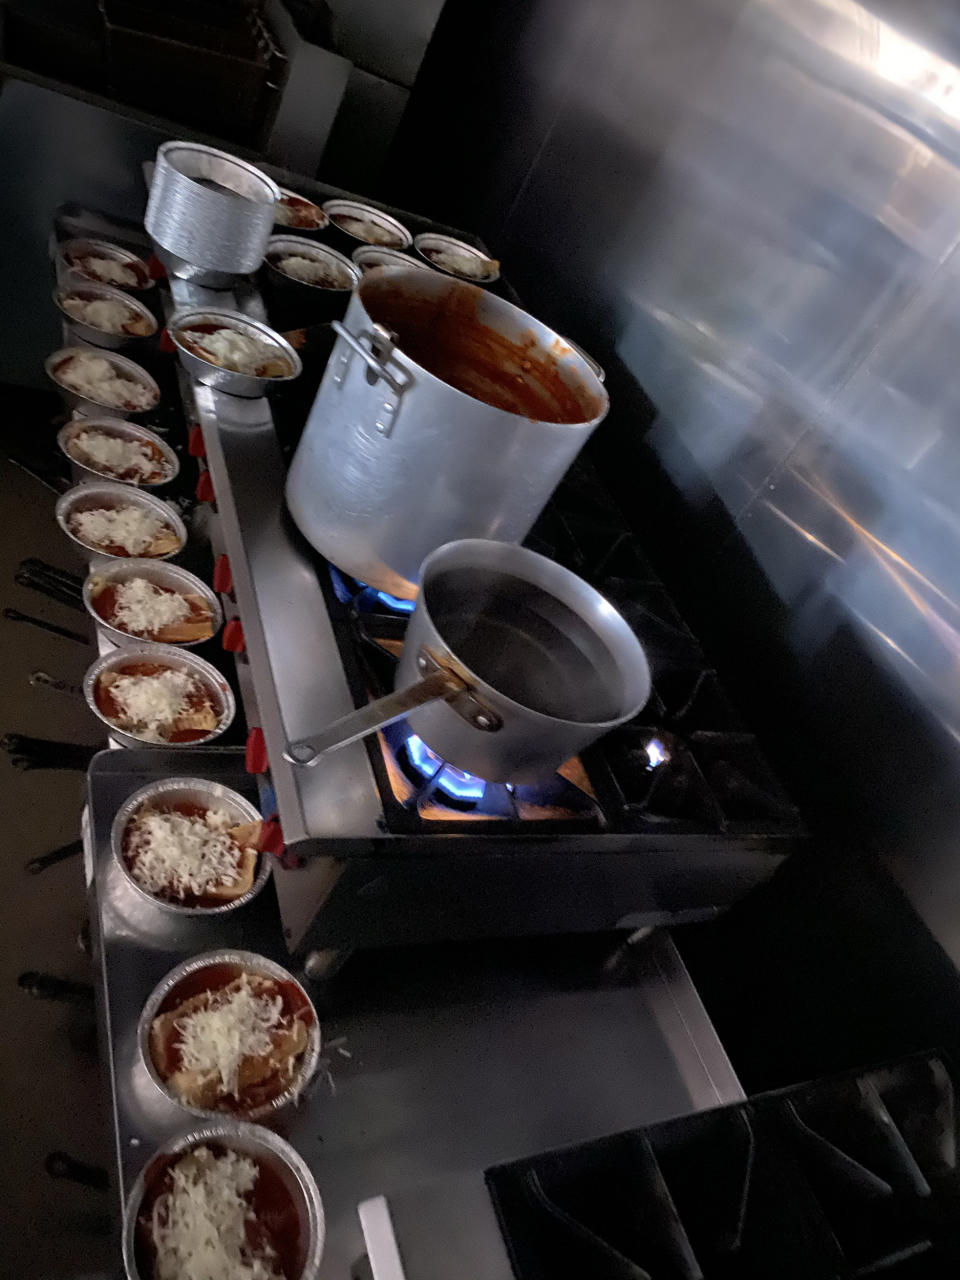 The restaurant was able to make spaghetti and lasagna despite not having power because their stoves and ovens run on gas.  (Ari Isufaj)